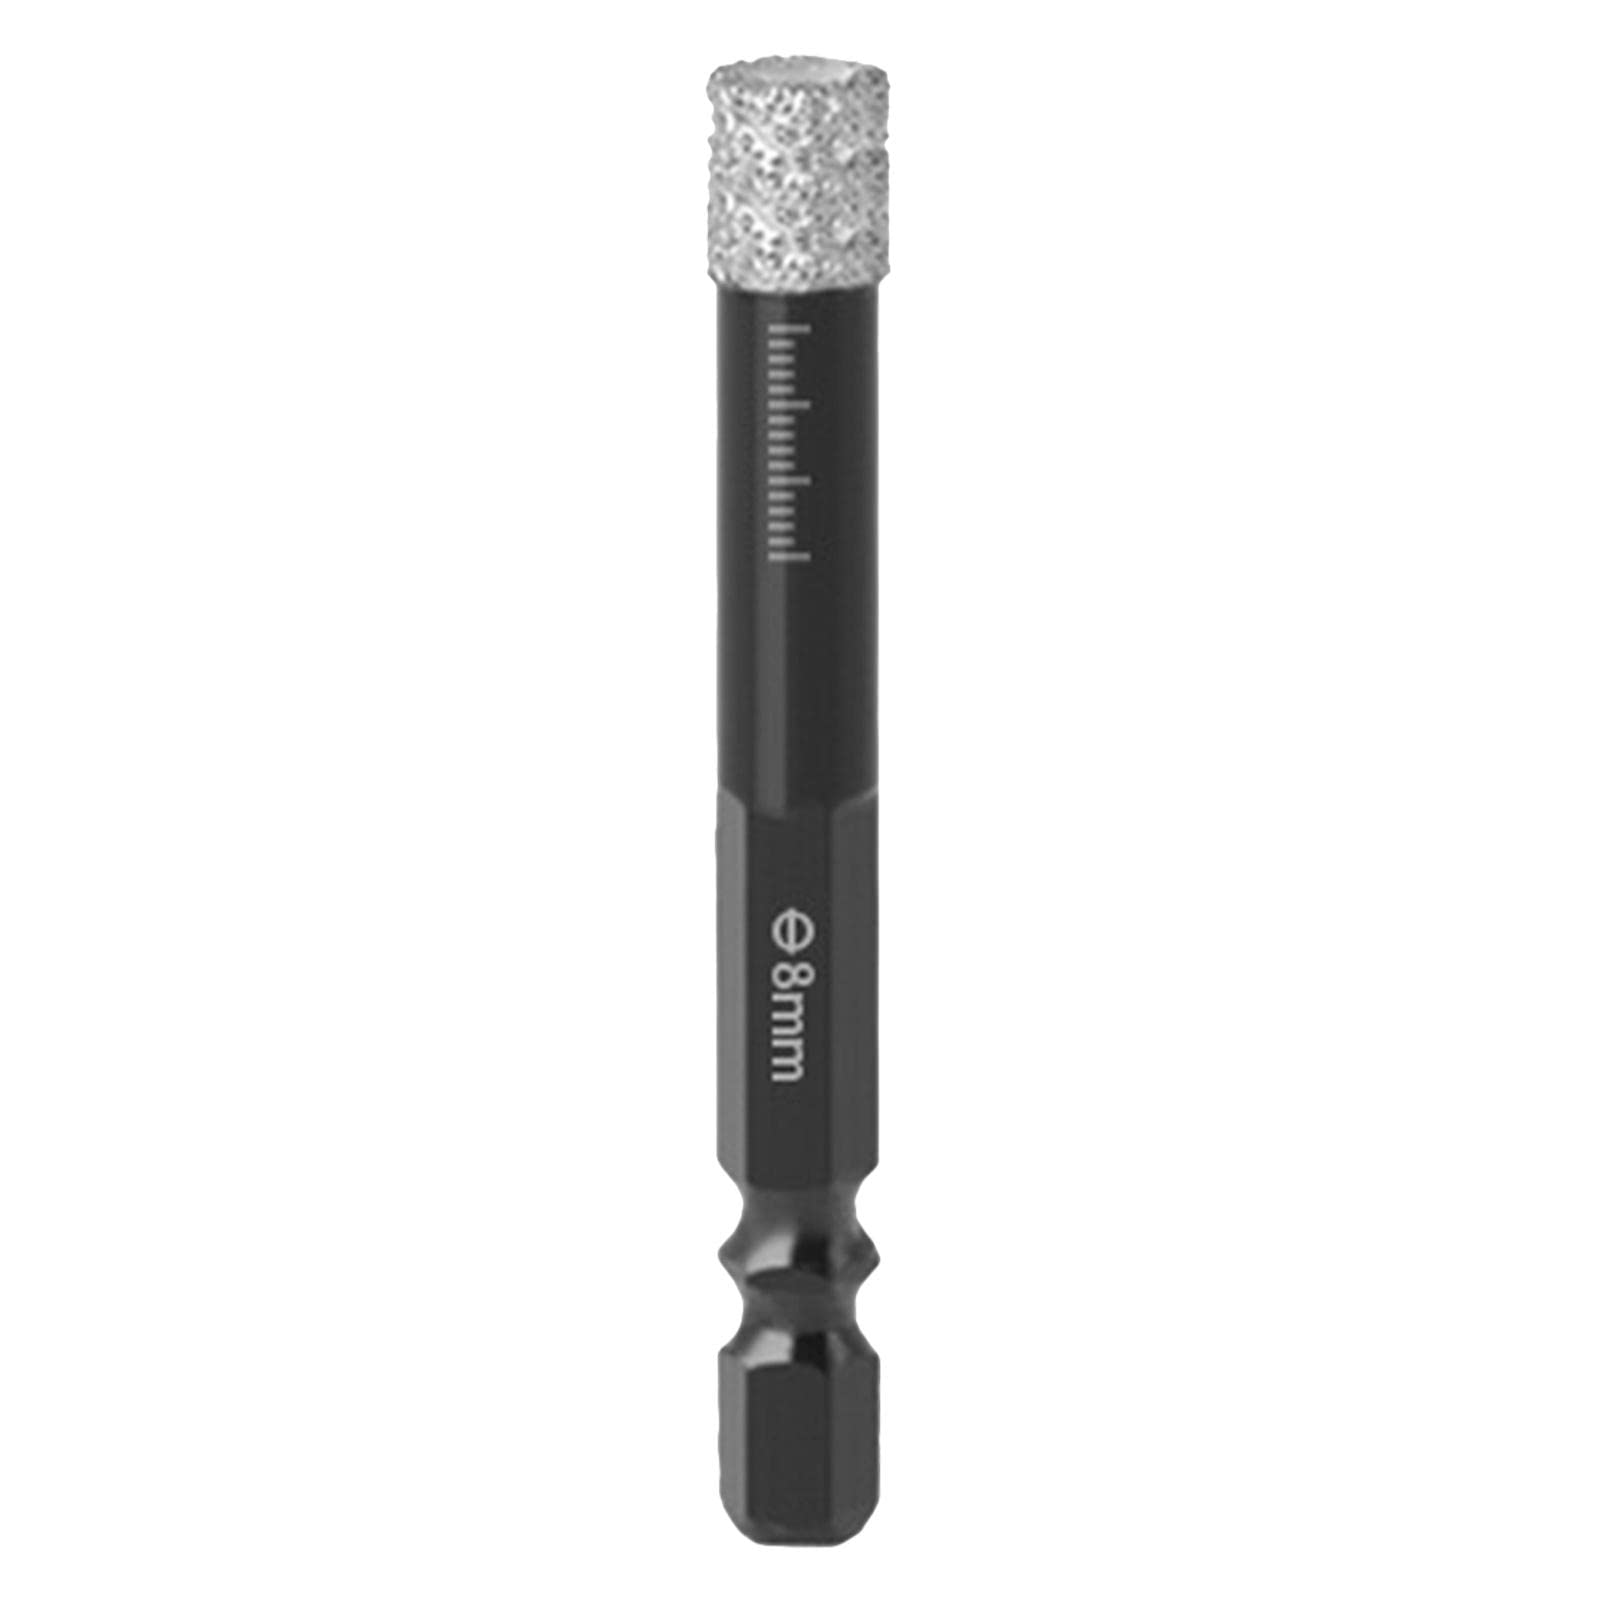 Diamond Hole Drill, Diamond Hole Saw | Ceramic Tile Drill Bit, Power Drill Parts Accessories, Available in 0.2/0.3/0.39/0.47/0.57/0.55 inches (6/8/10/12/14 mm) Available